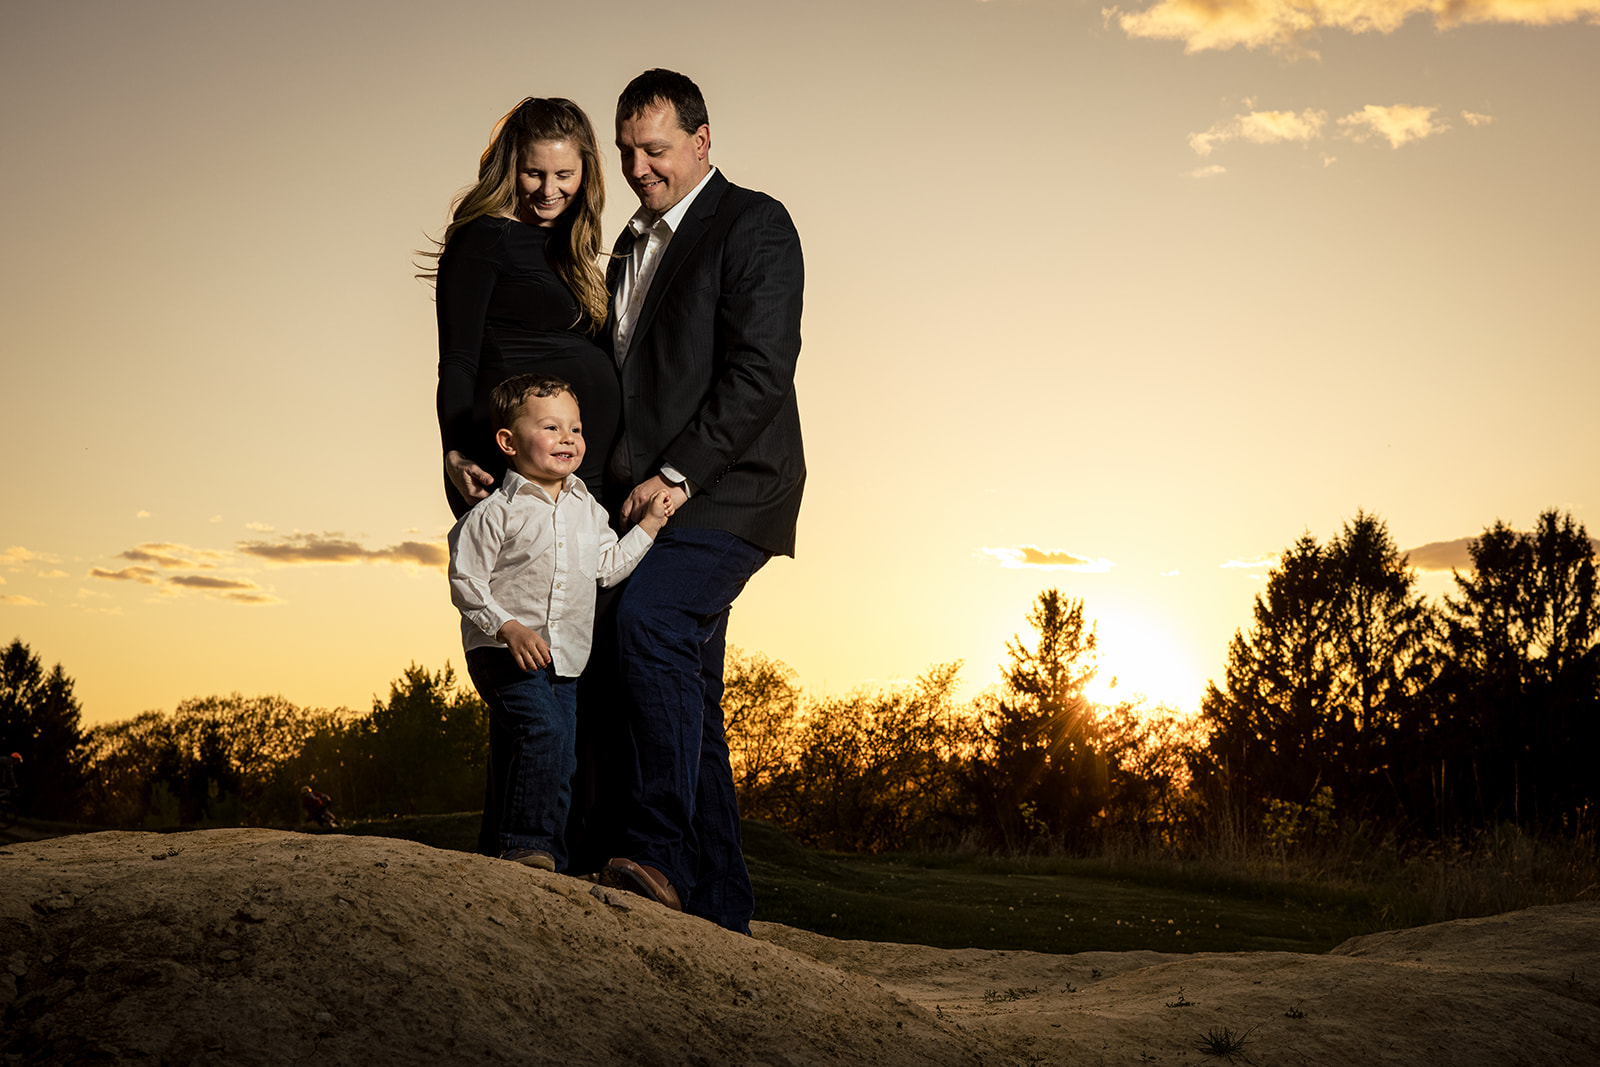 Expecting Joy: Golden Hour Splendor by La Crosse photographer, Jeff Wiswell of J.L. Wiswell Photography